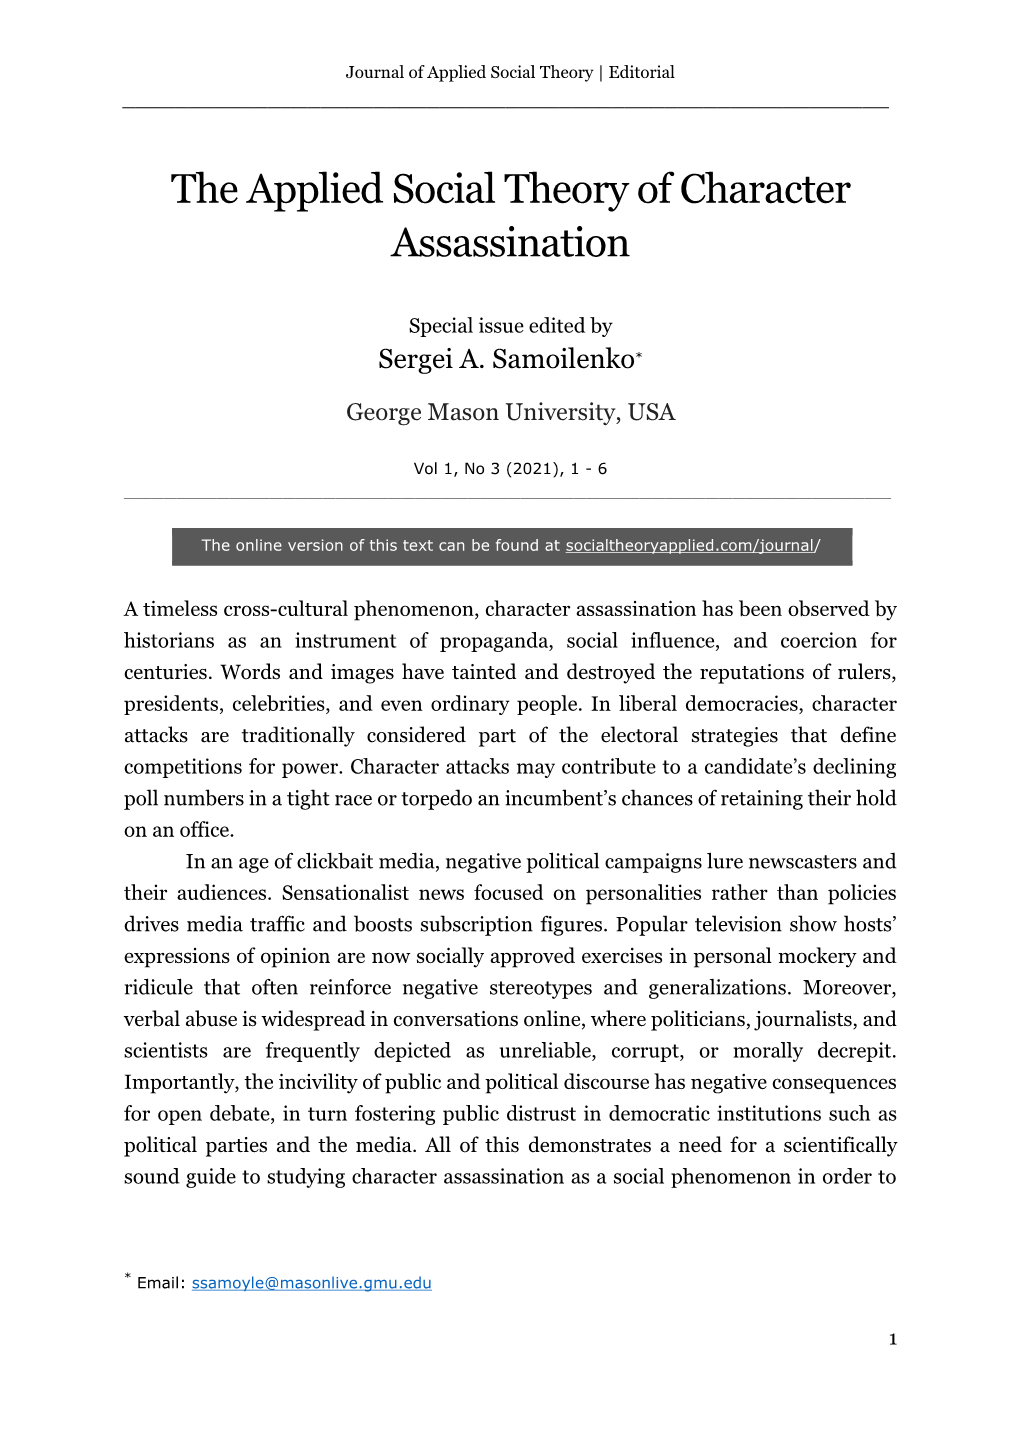 The Applied Social Theory of Character Assassination